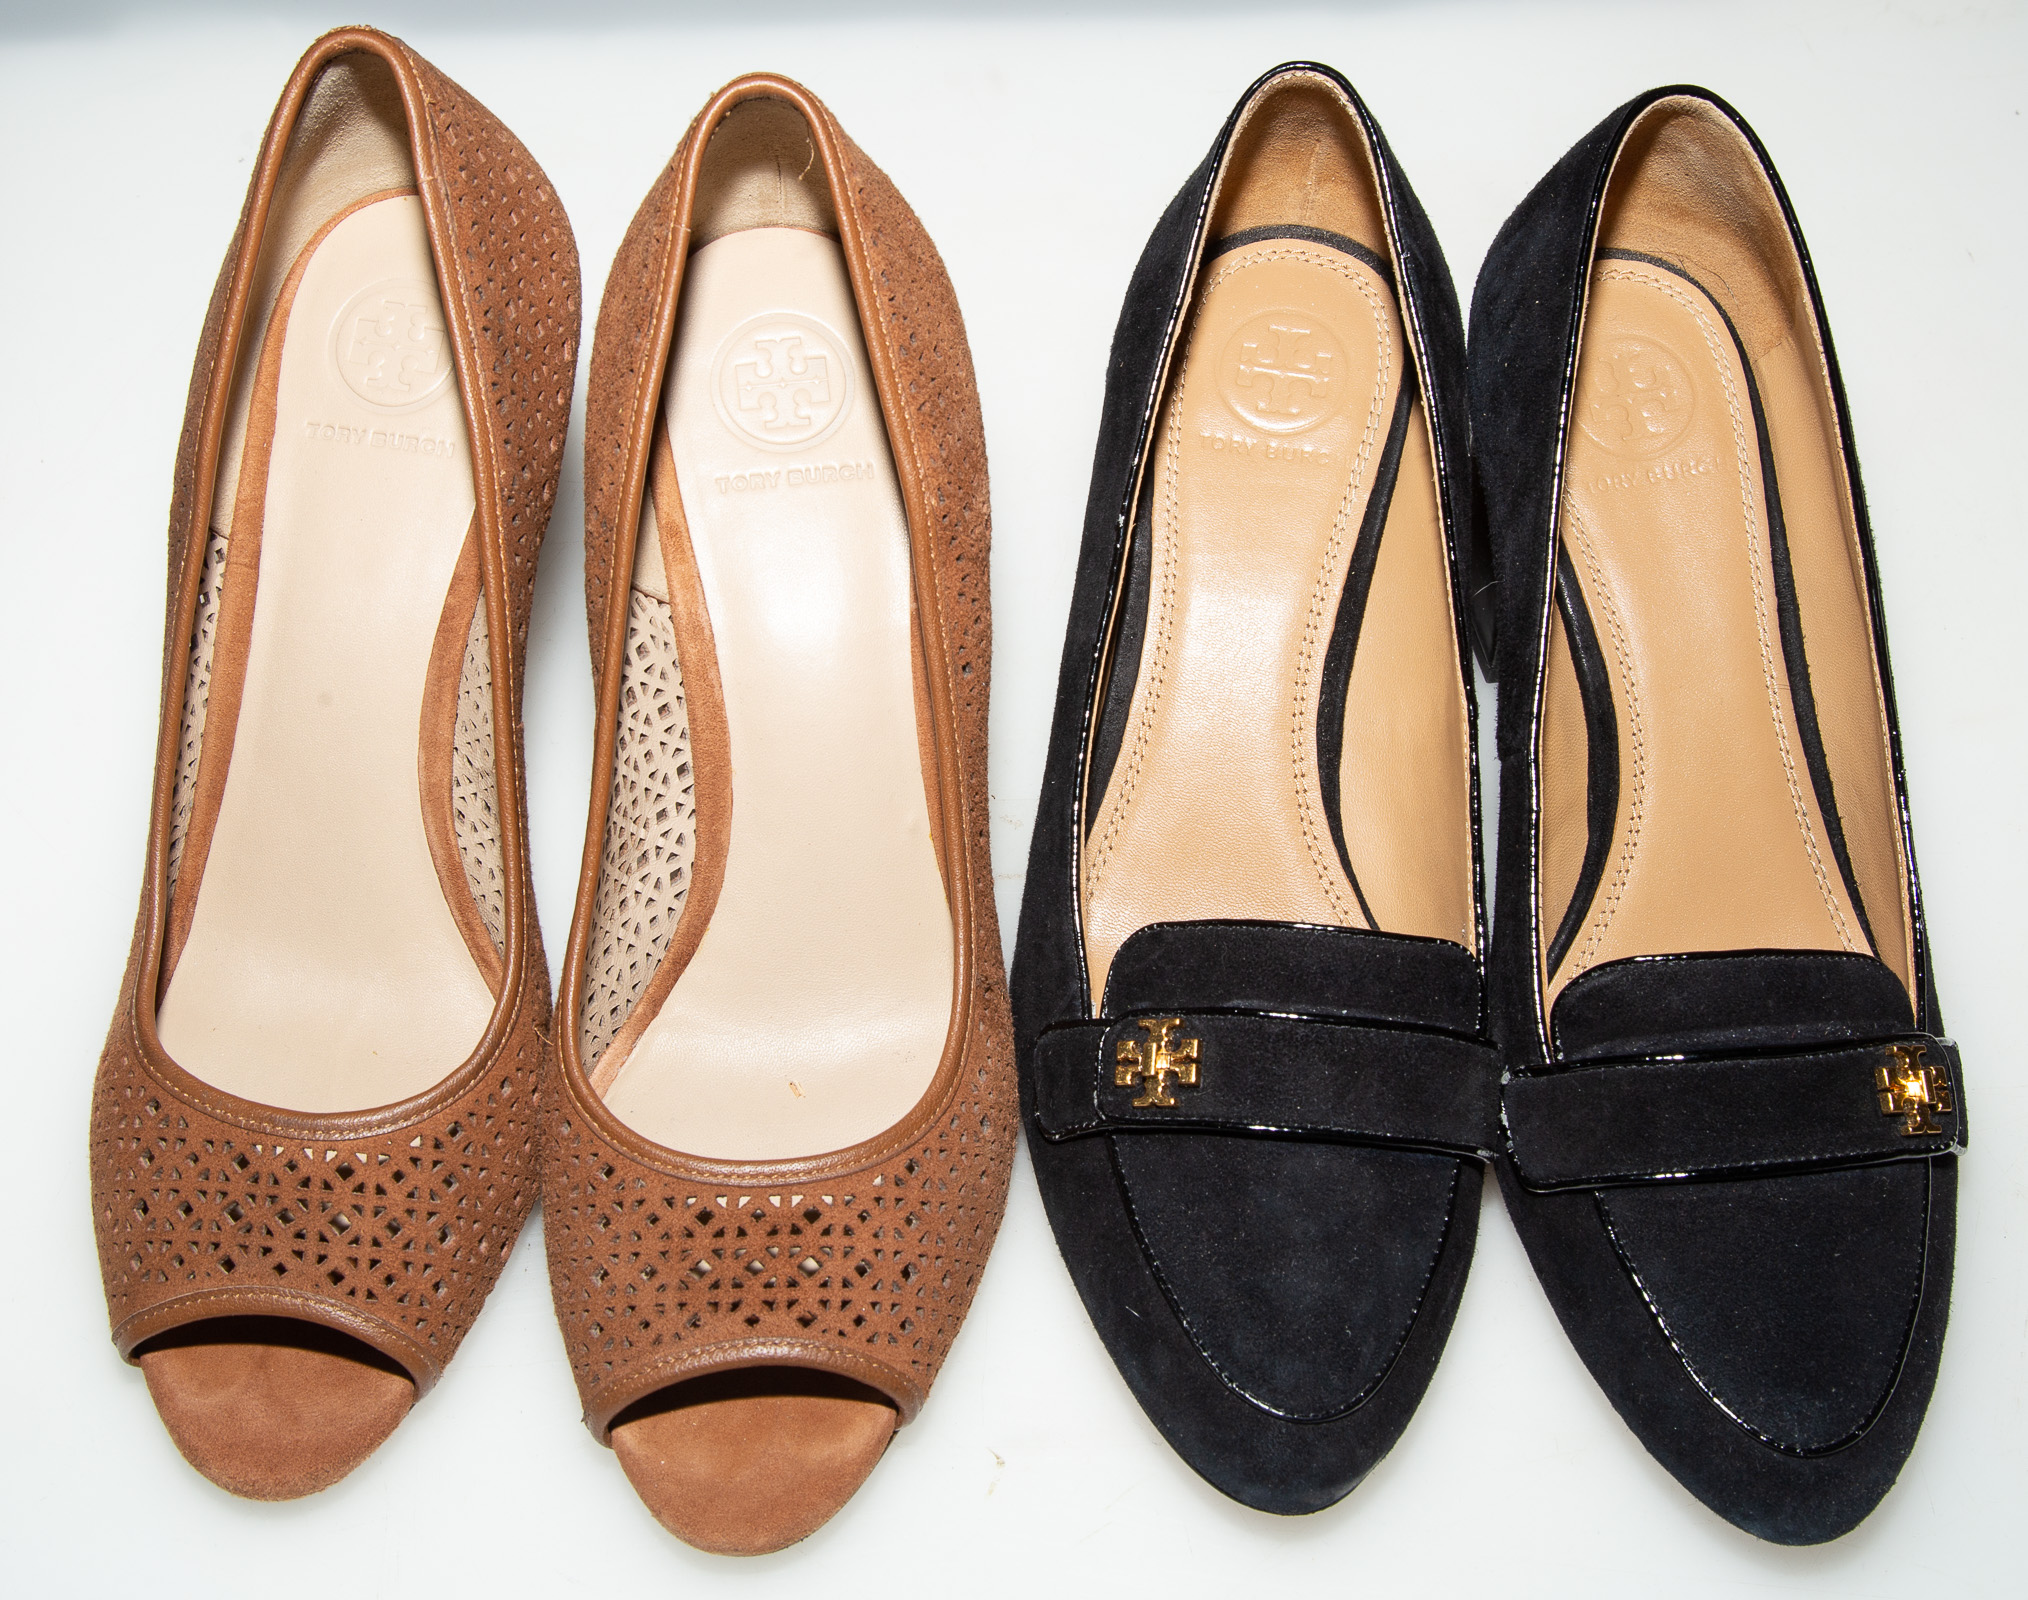 TWO PAIRS TORY BURCH SHOES both